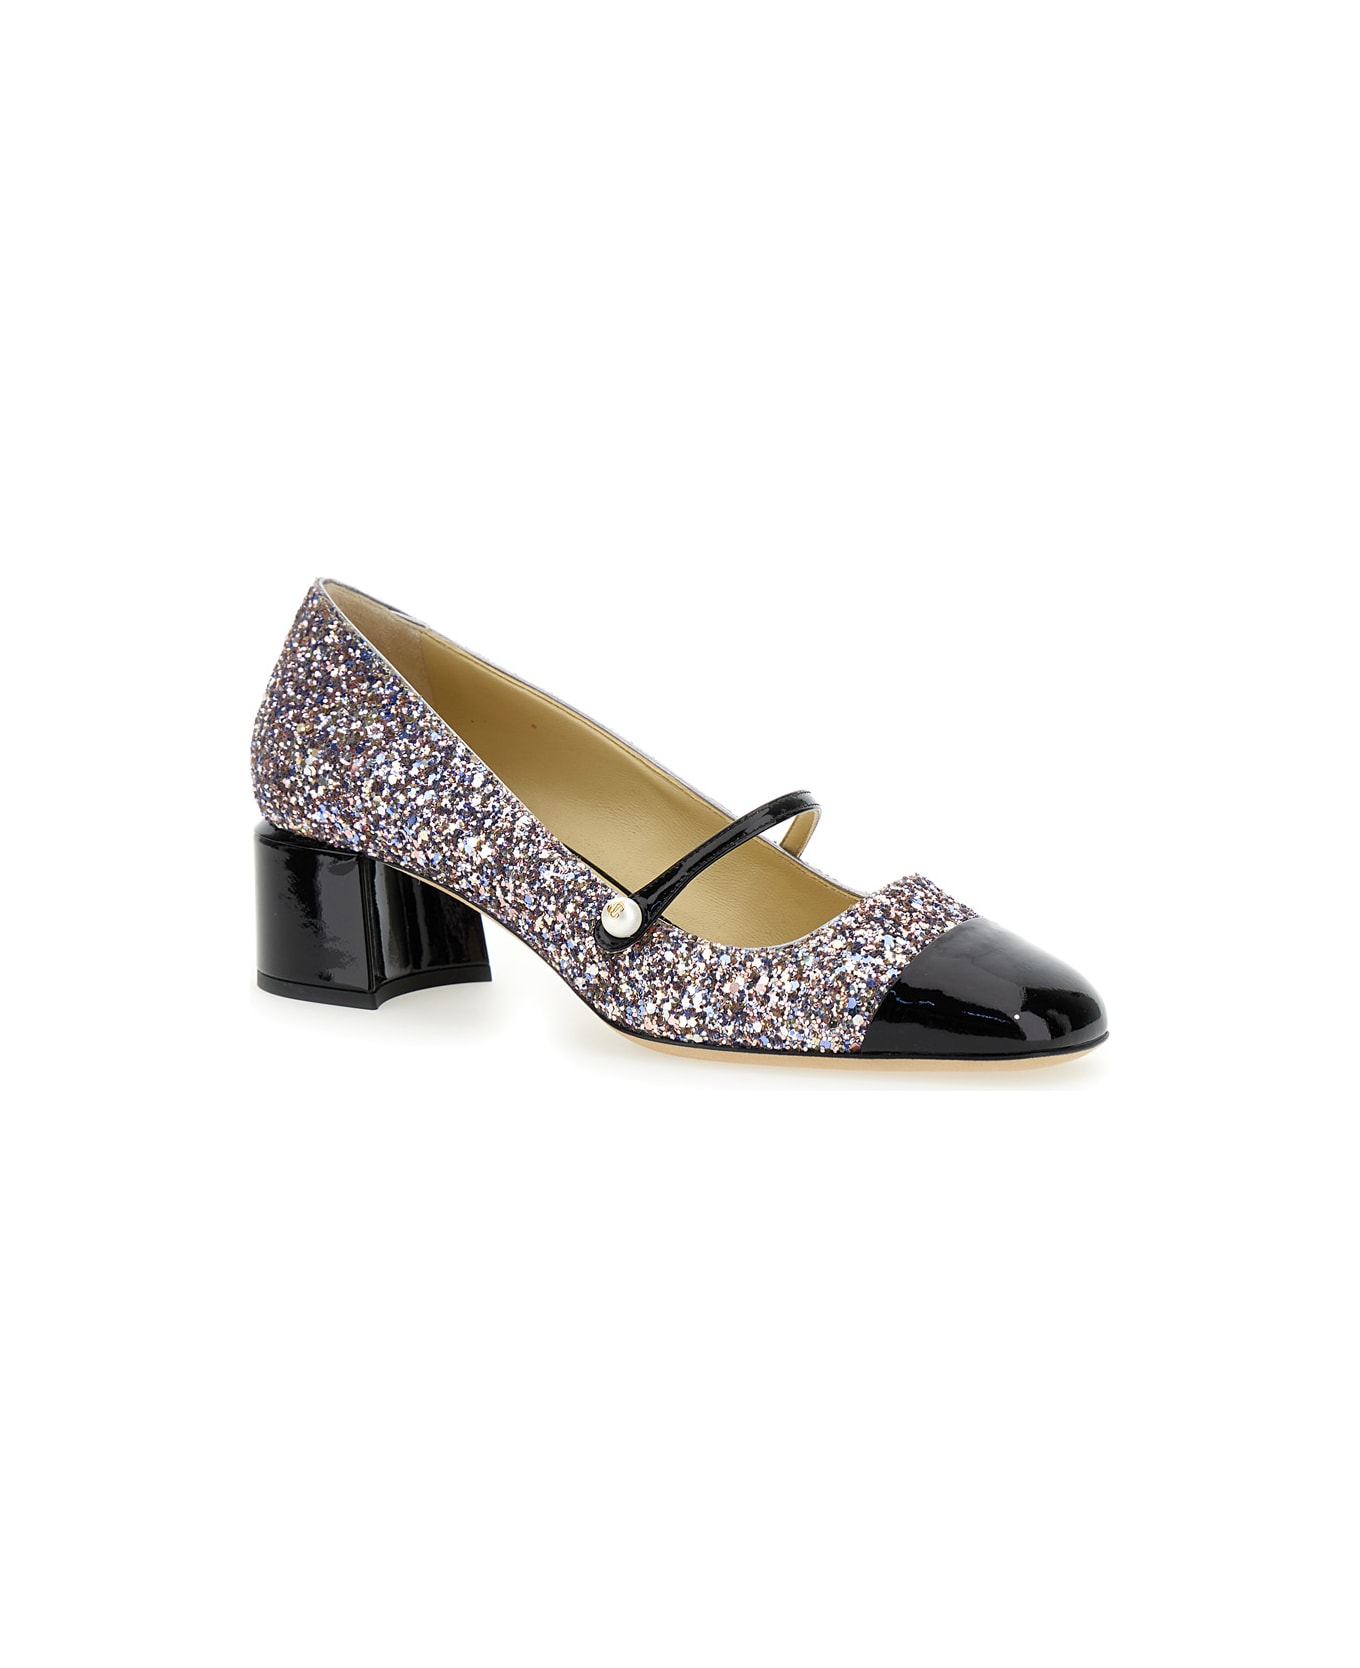 Jimmy Choo 'elisa 45' Multicolor Pumps With Block Heel In Glitter Fabric And Patent Leather Woman - Multicolor ハイヒール